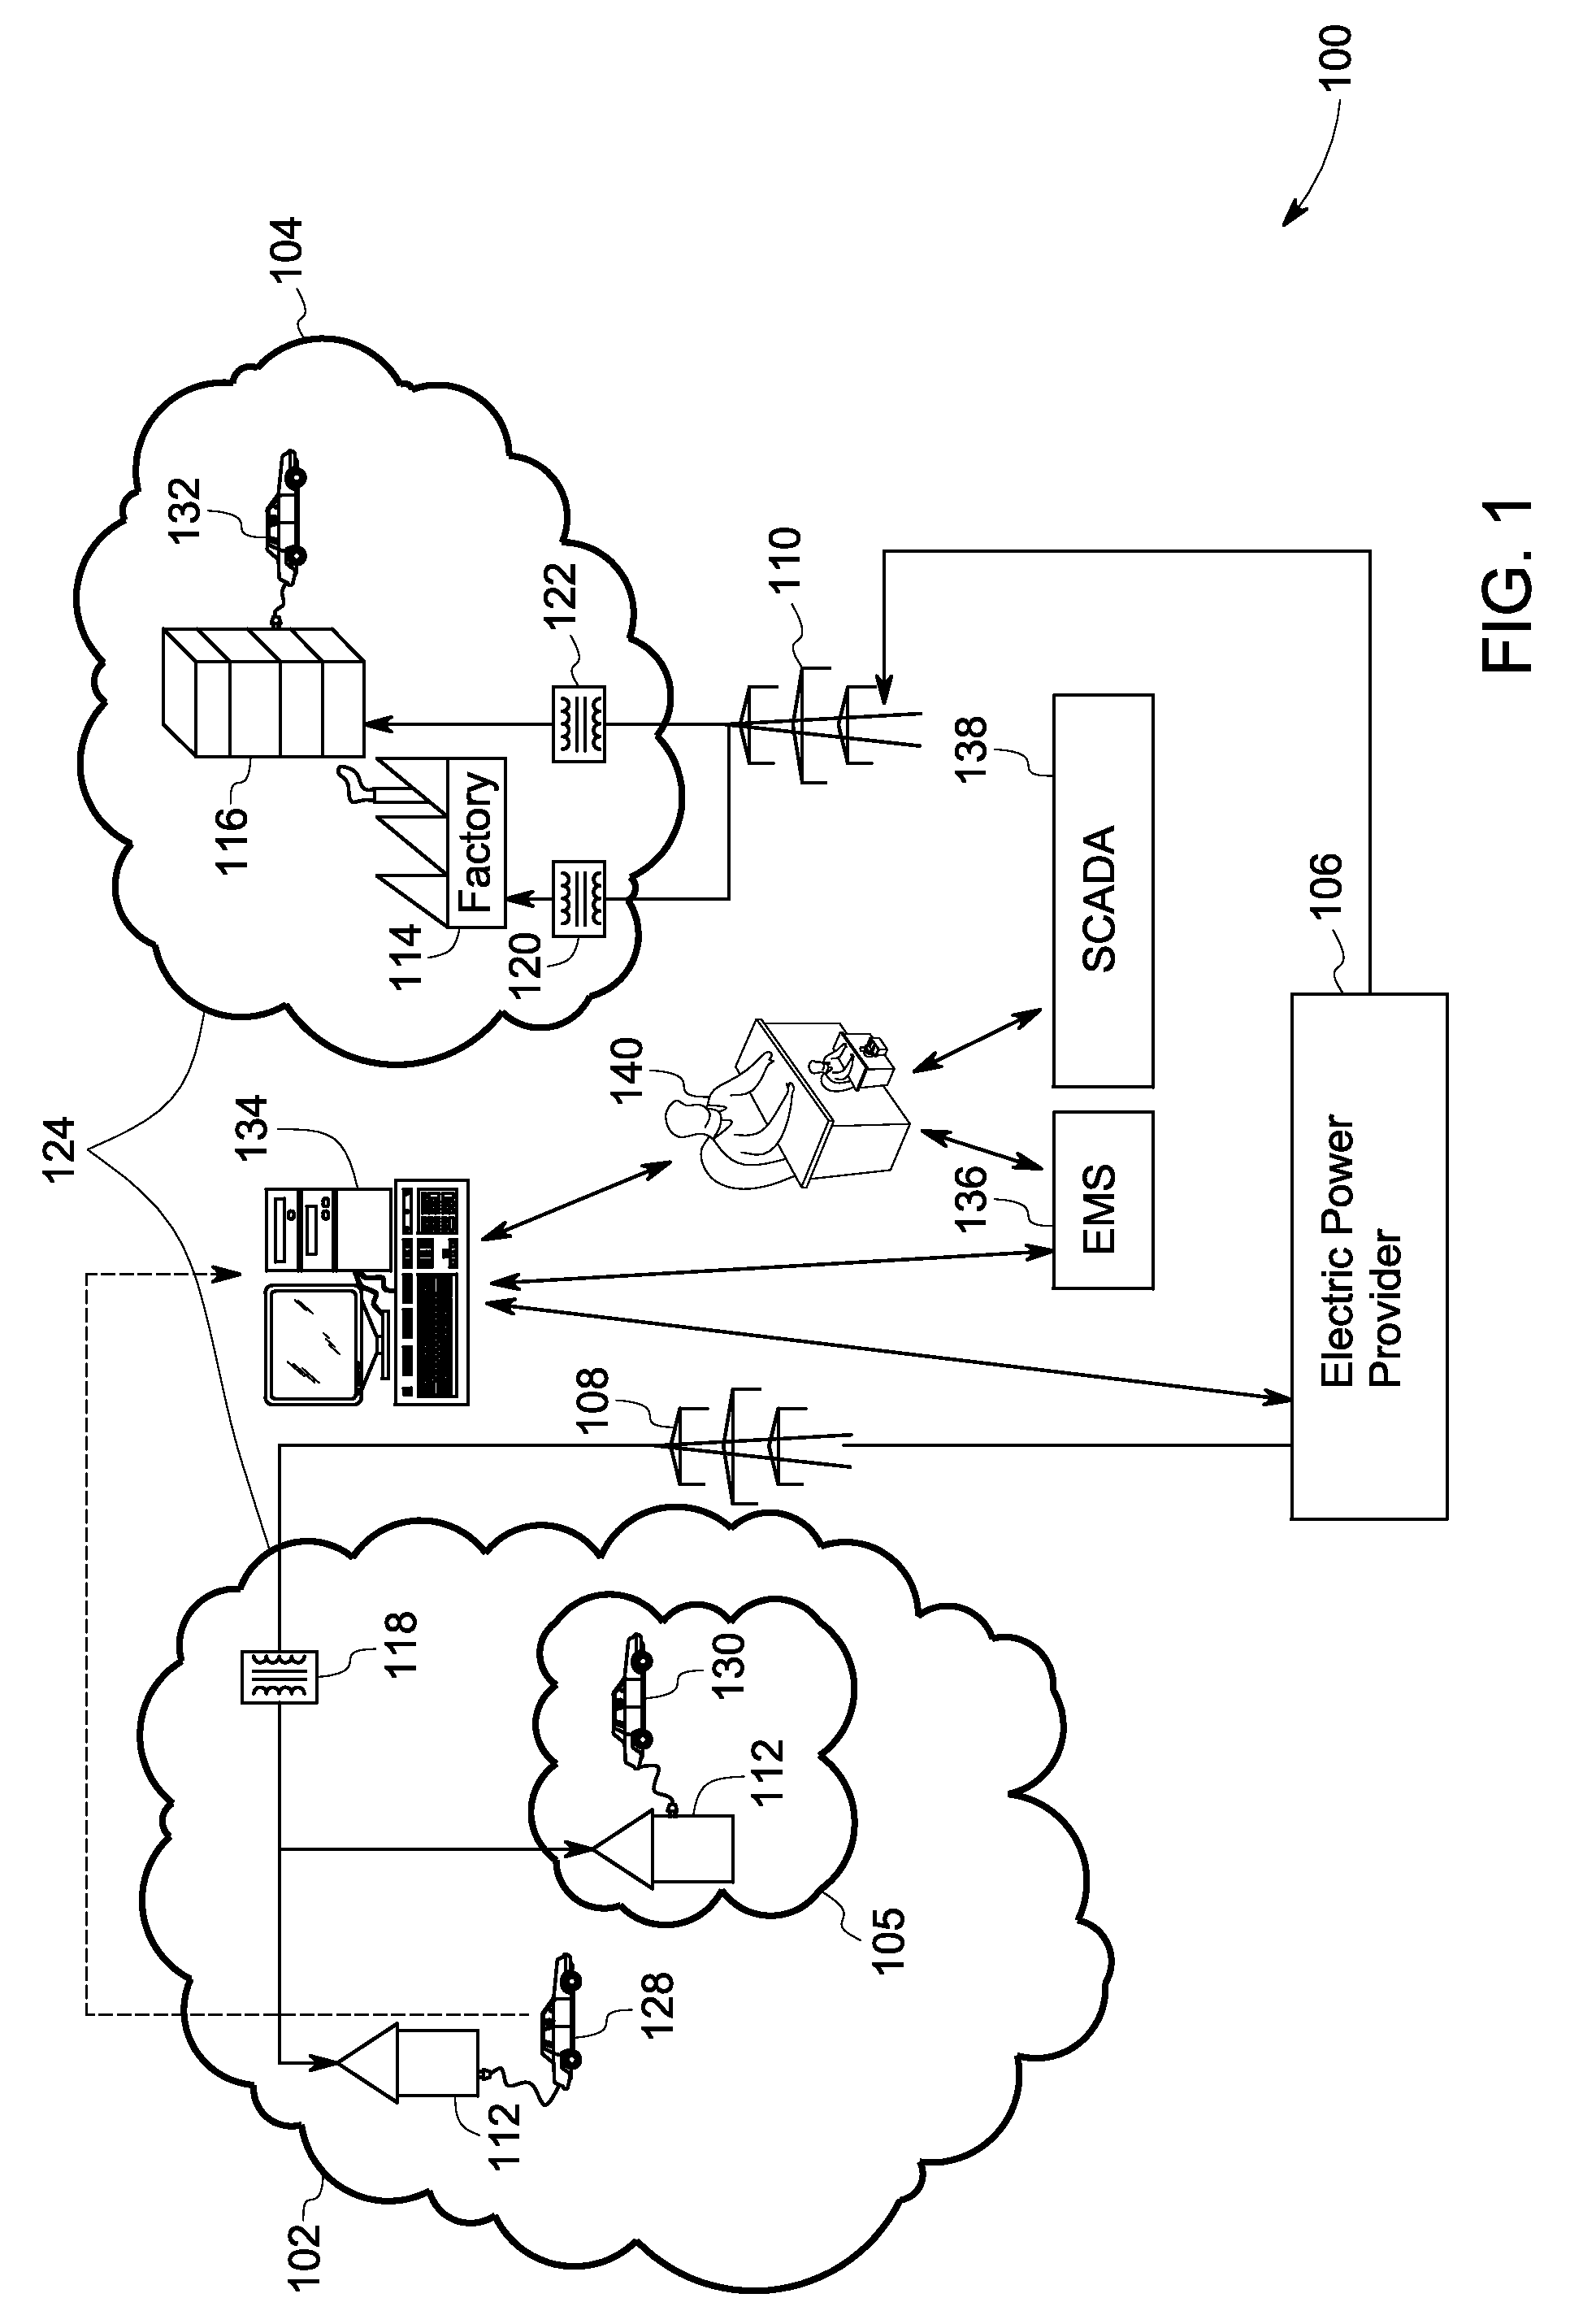 System and method for optimal load planning of electric vehicle charging